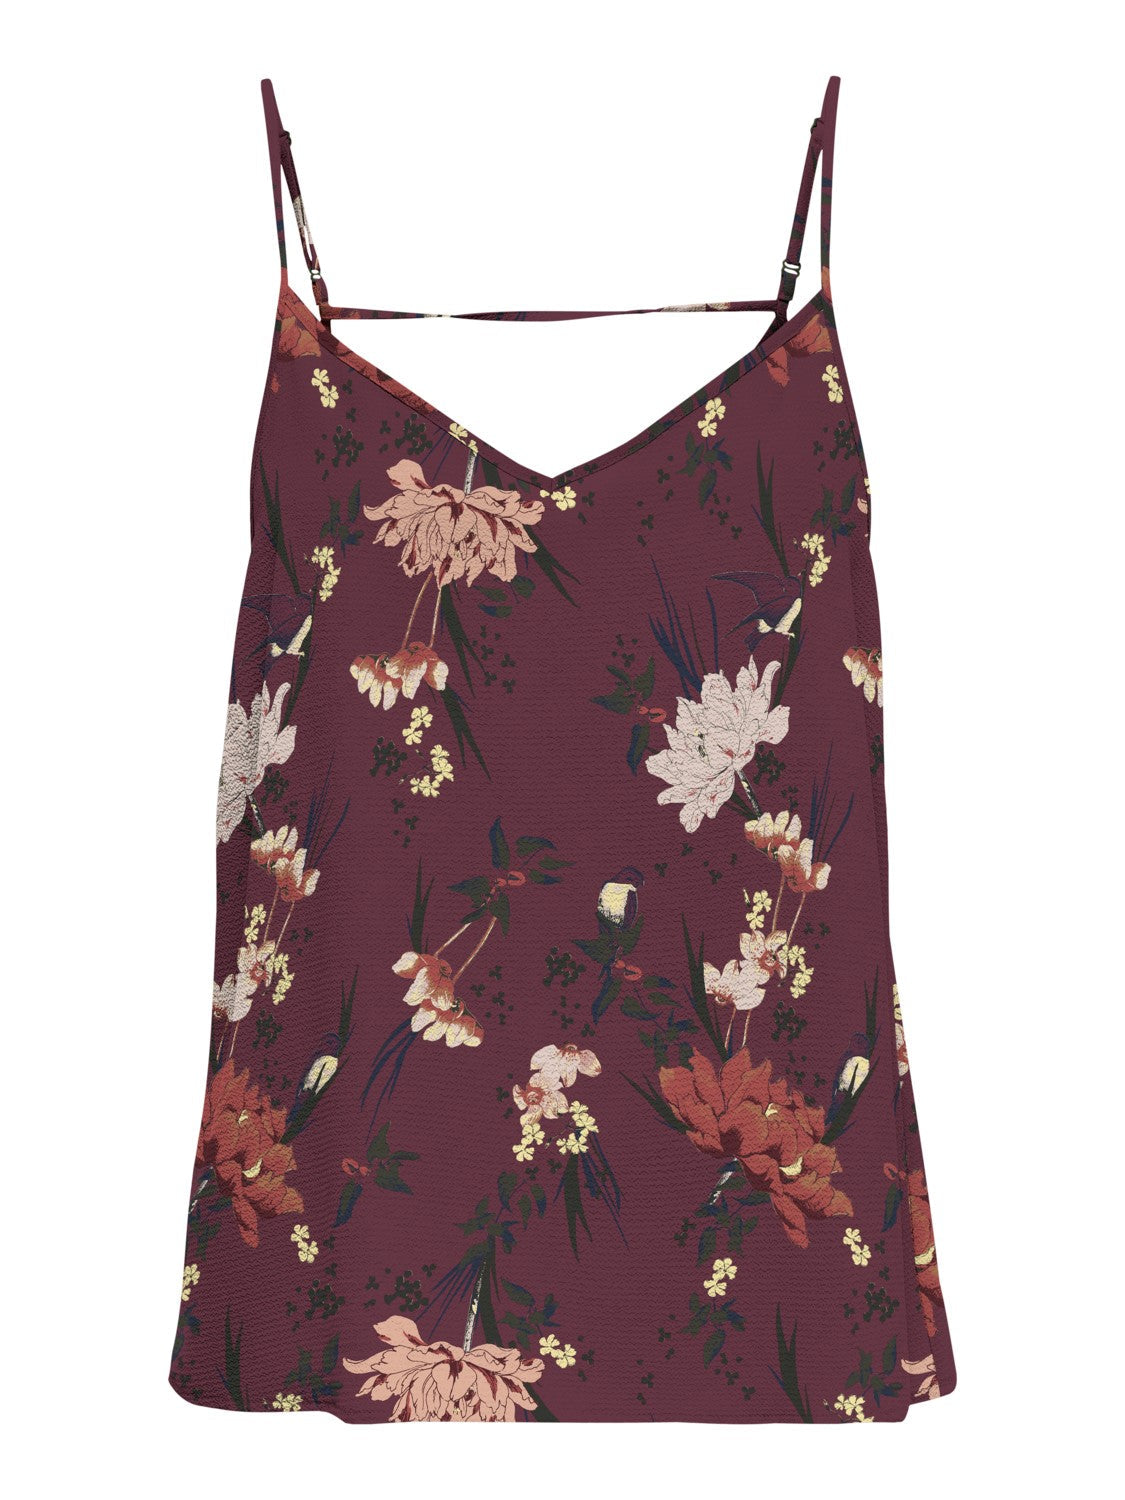 ONLY Women's Pink Floral Tank Top